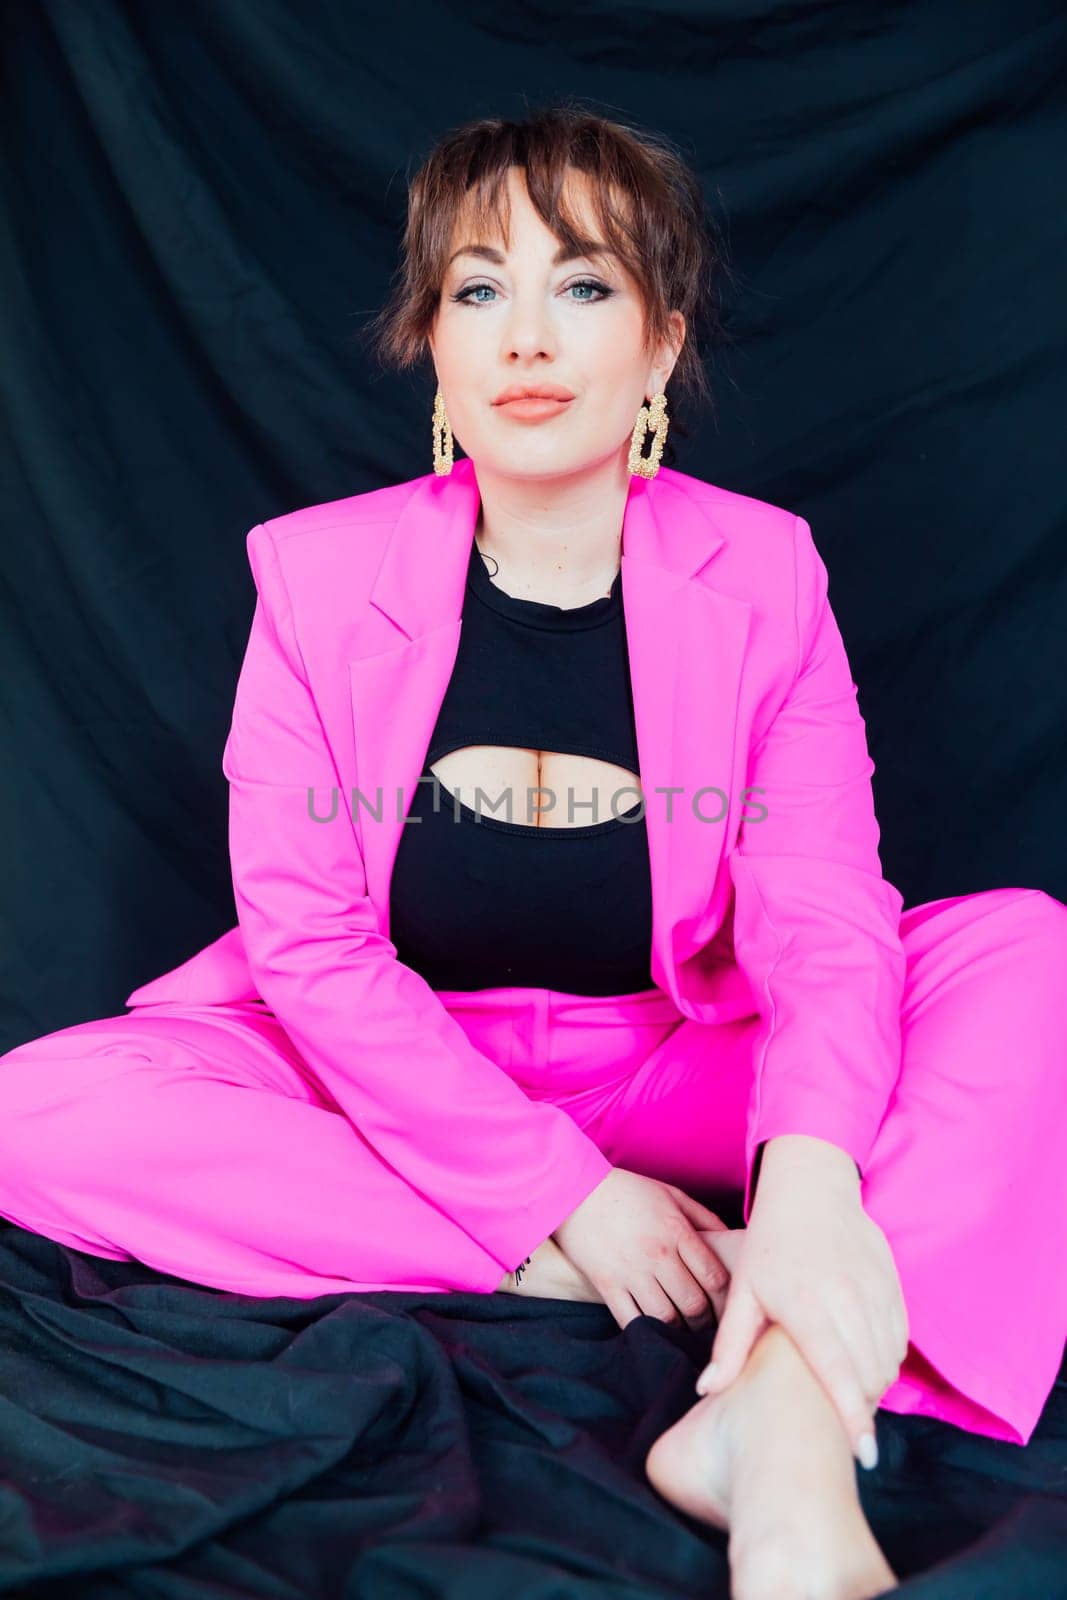 Woman in bright suit posing on black background in studio